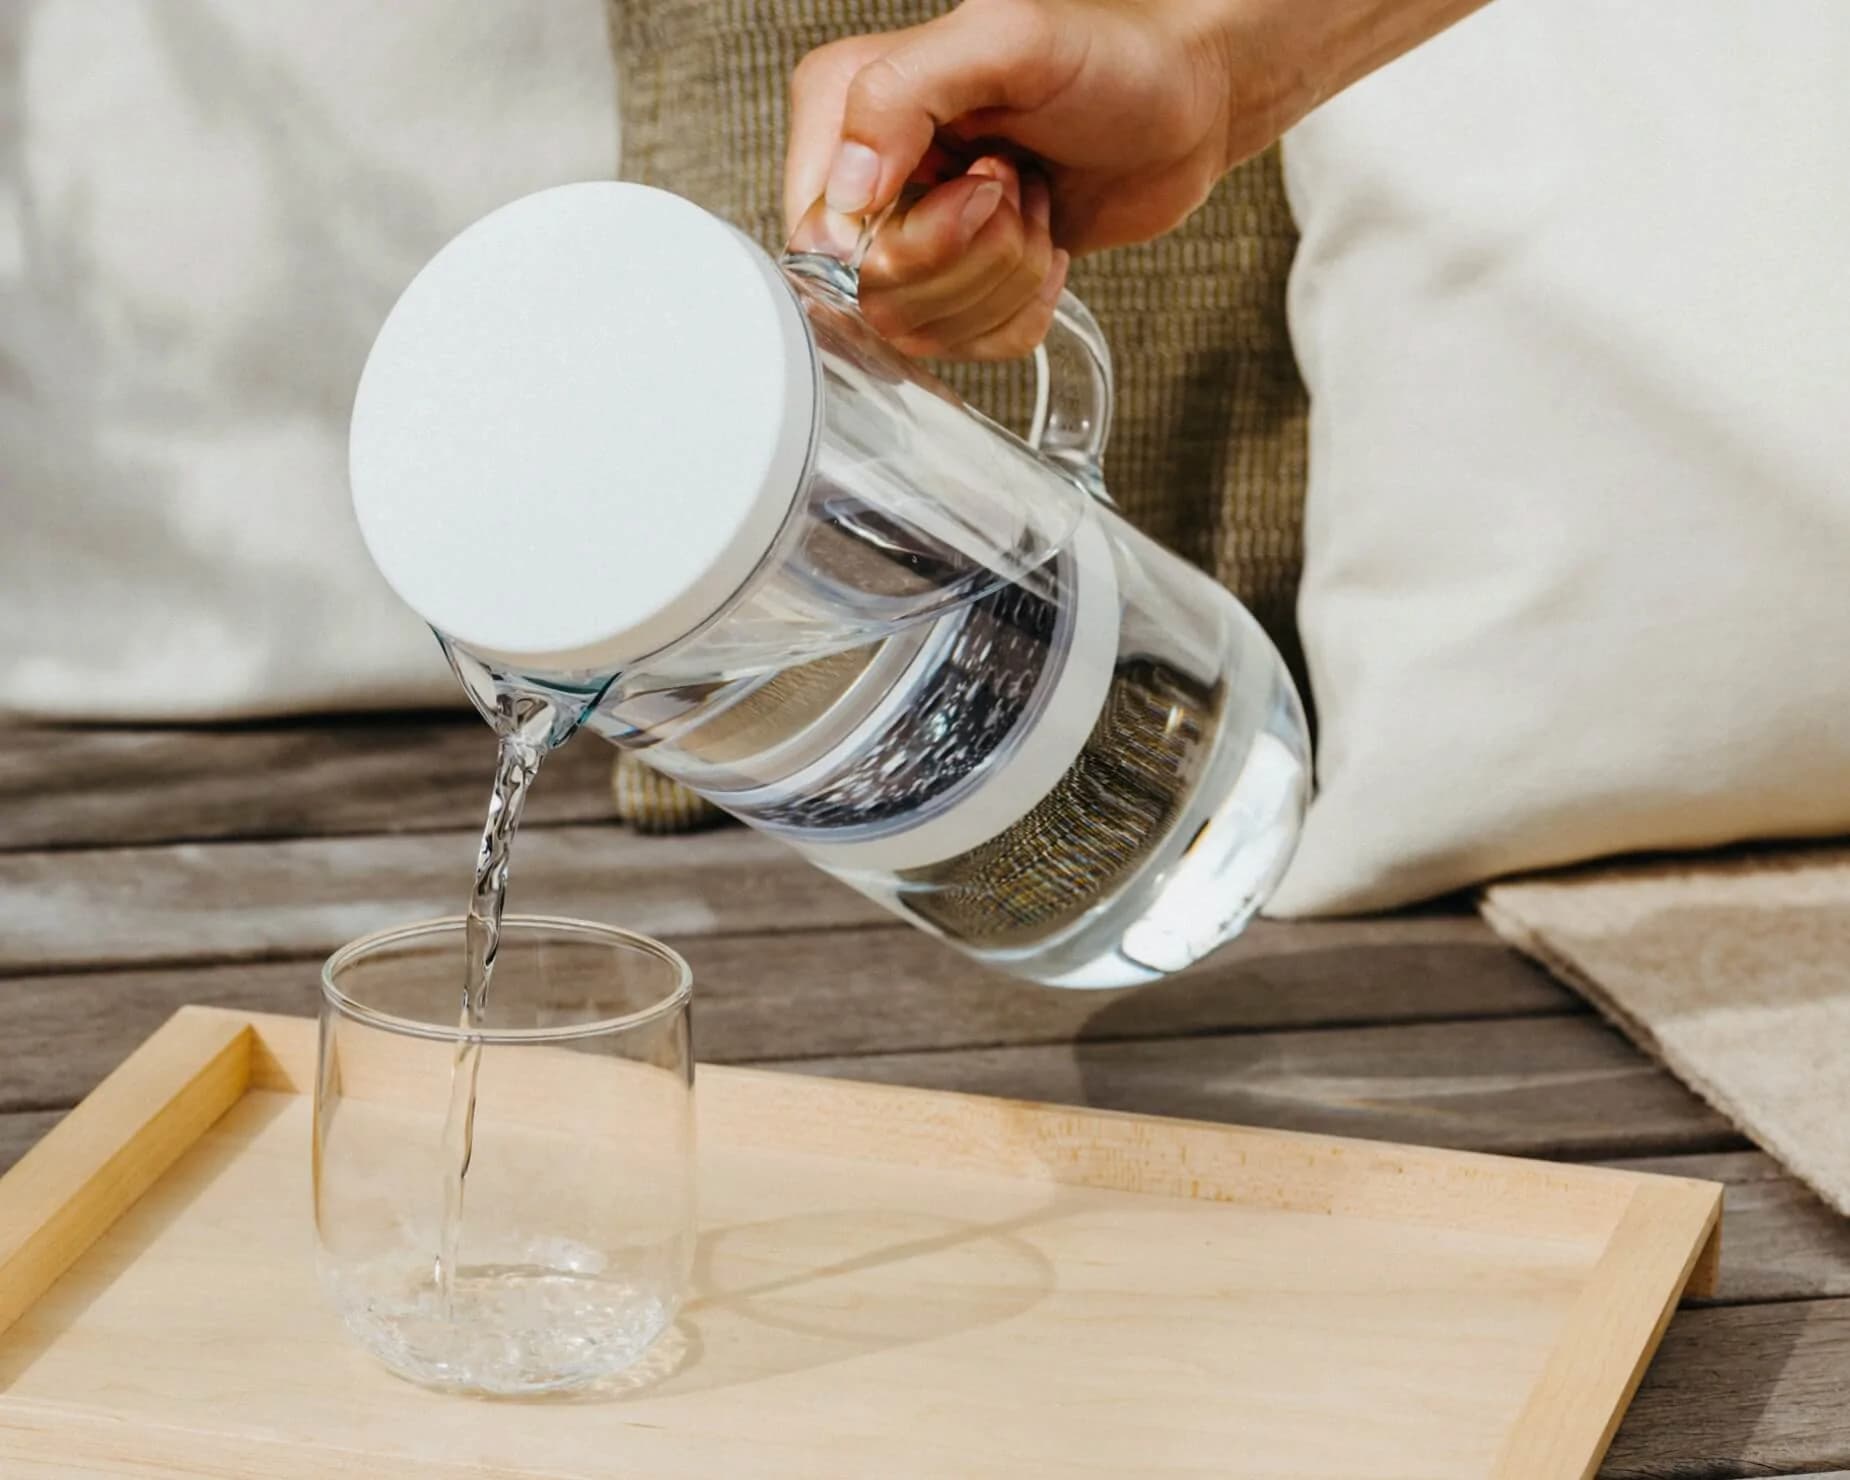 LUCY® Filter Carafe in use